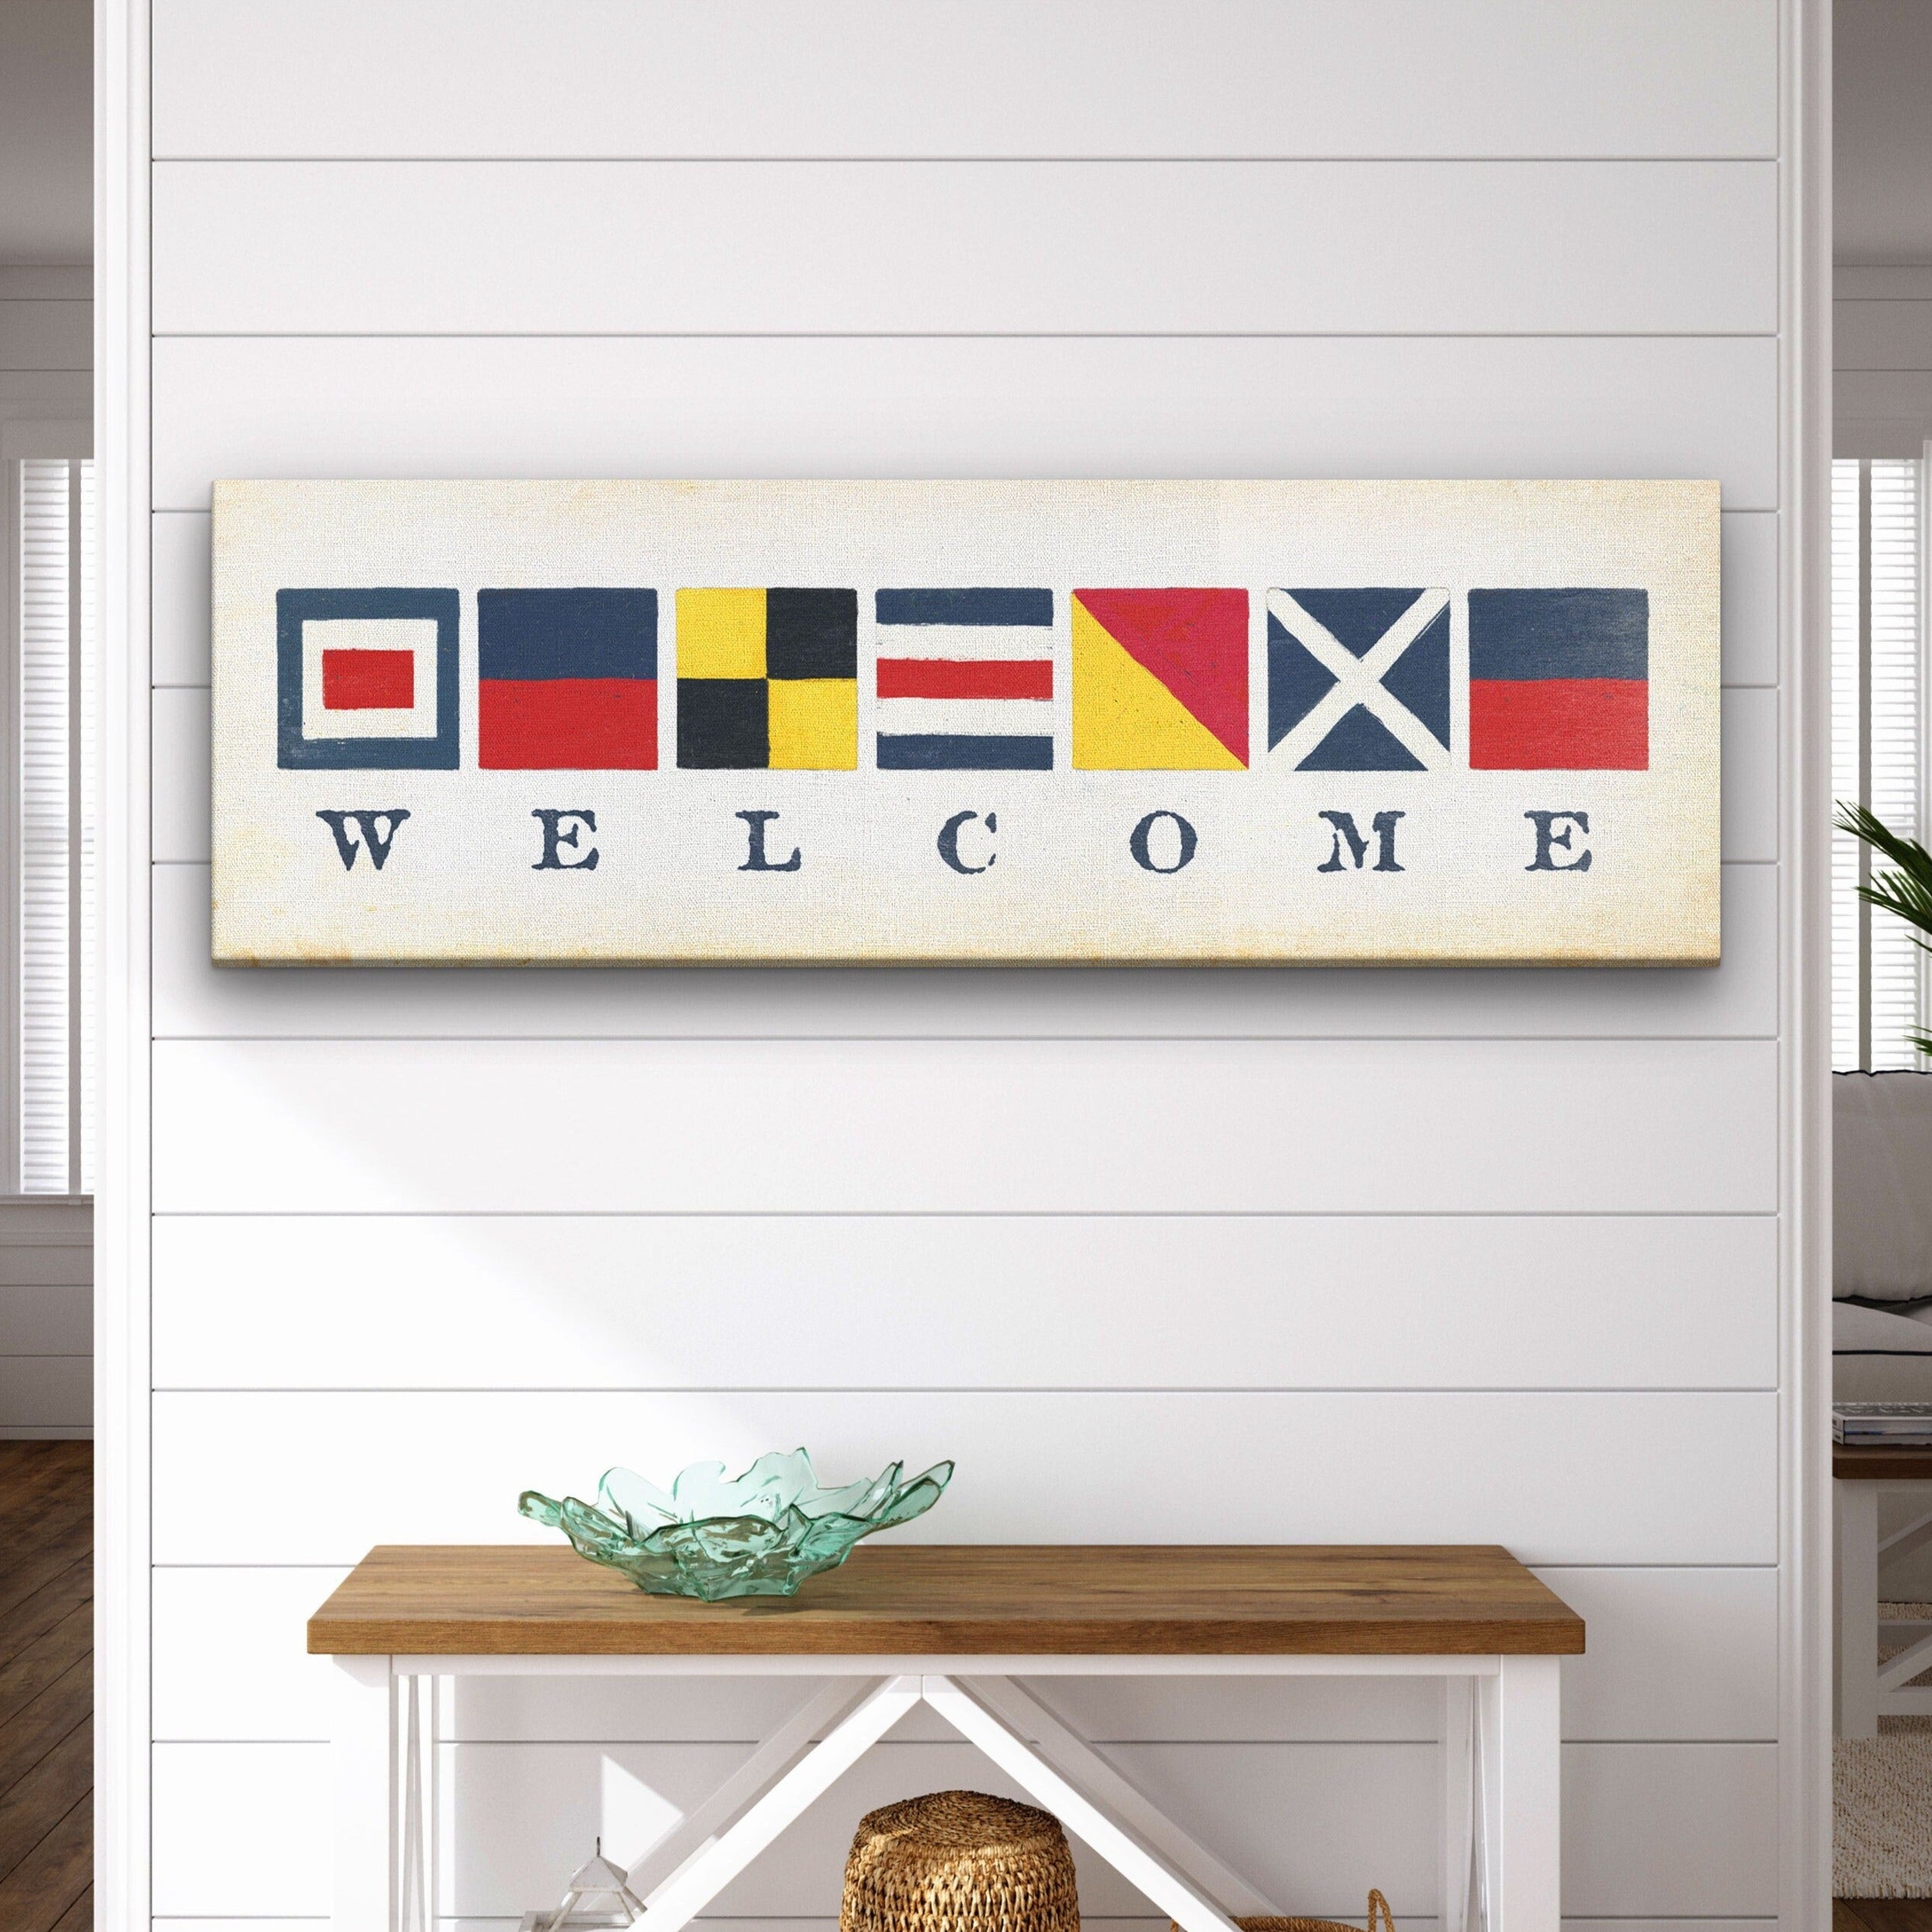 Raising the Flags -Decorating Ideas with Nautical Signal Flags | Decor, Nautical  decor, Flag decorating ideas